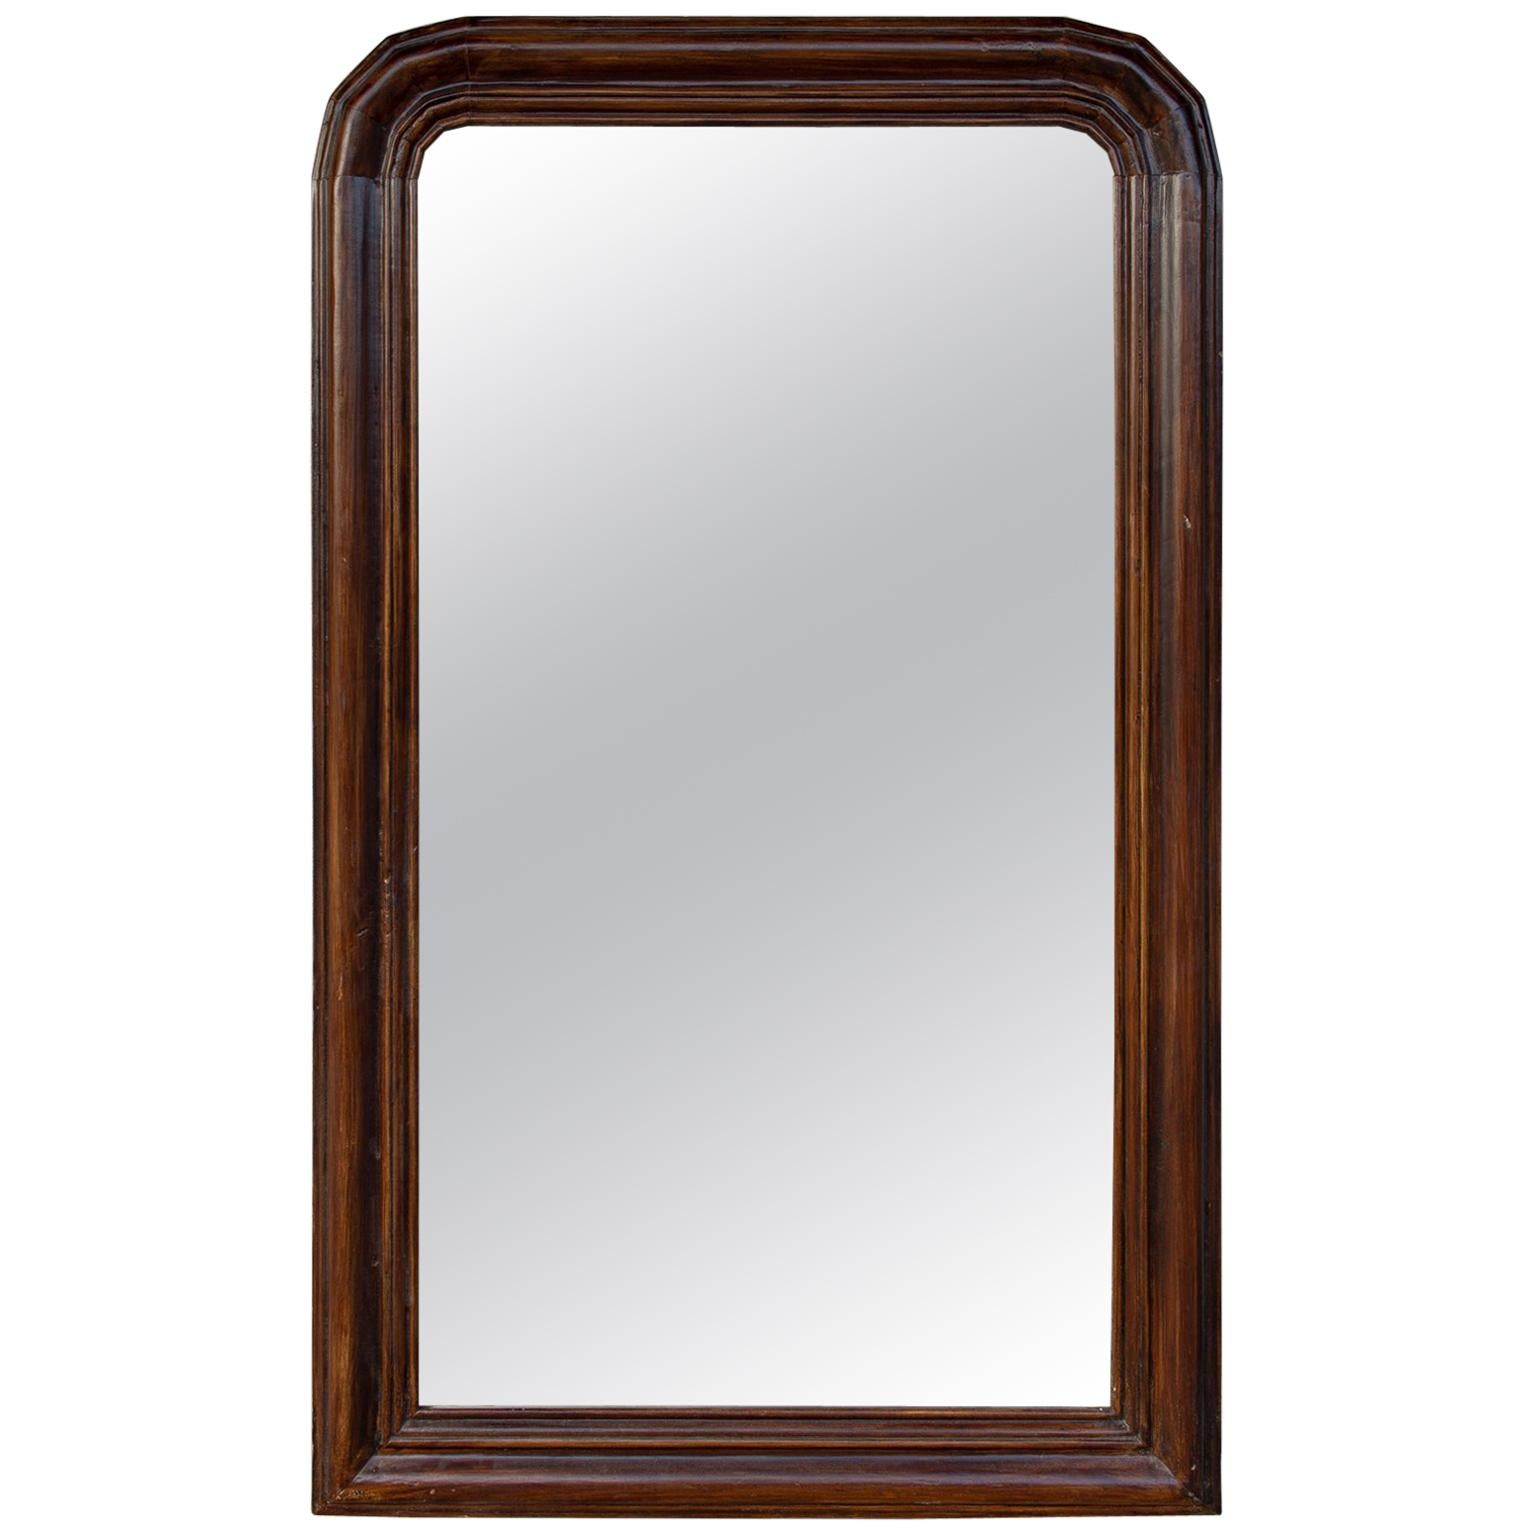 Antique Wood Frame Louis Philippe Mirror found in France